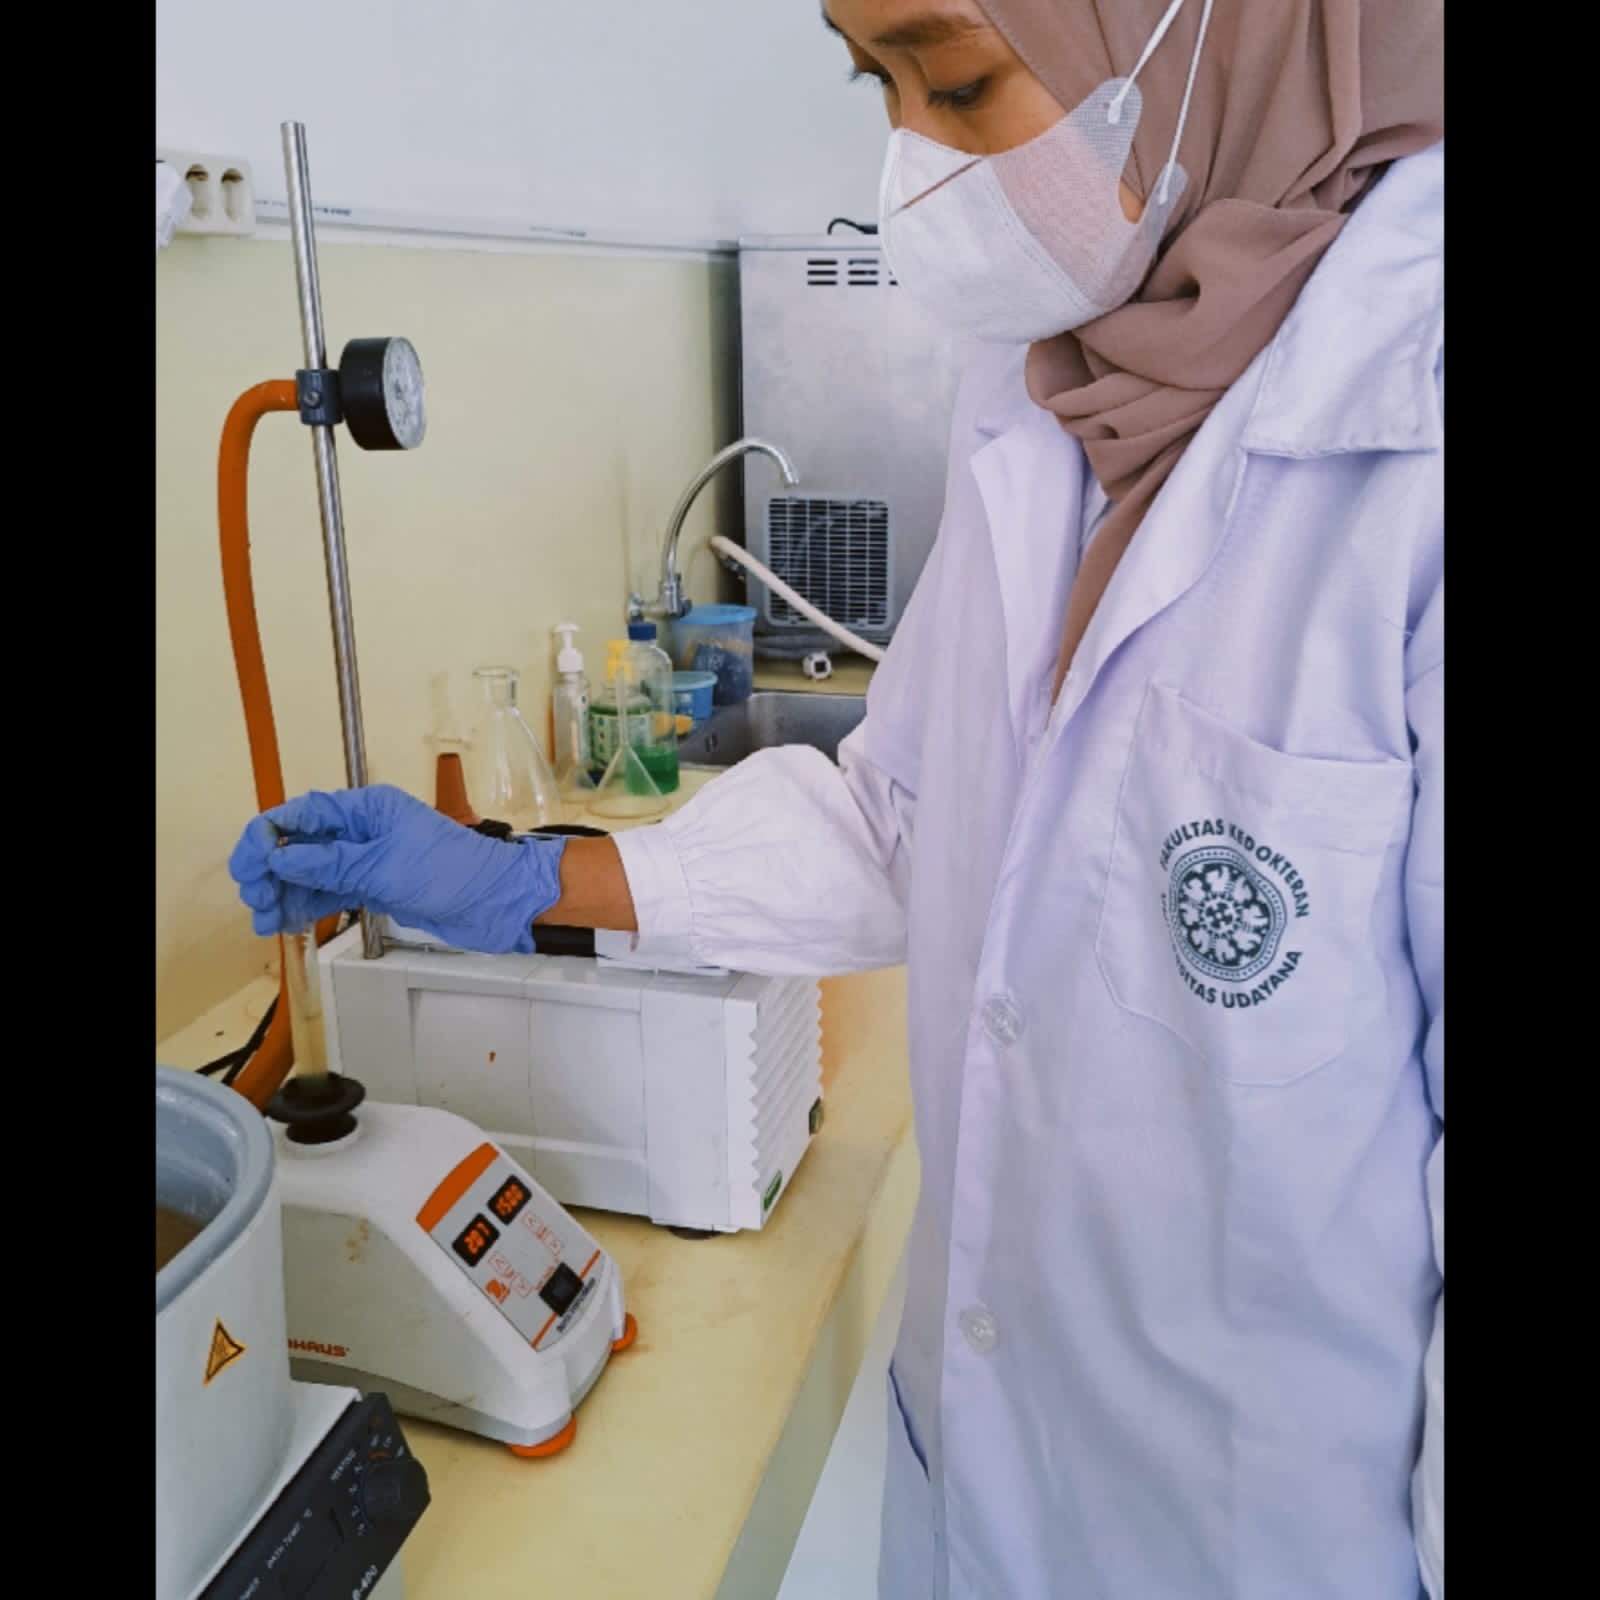 FK Unud Student Creativity Program for Exact Research (PKM-RE) Team Tests the Effectiveness of Seagrass Seed Extract for Cholesterol Reduction & nbsp;